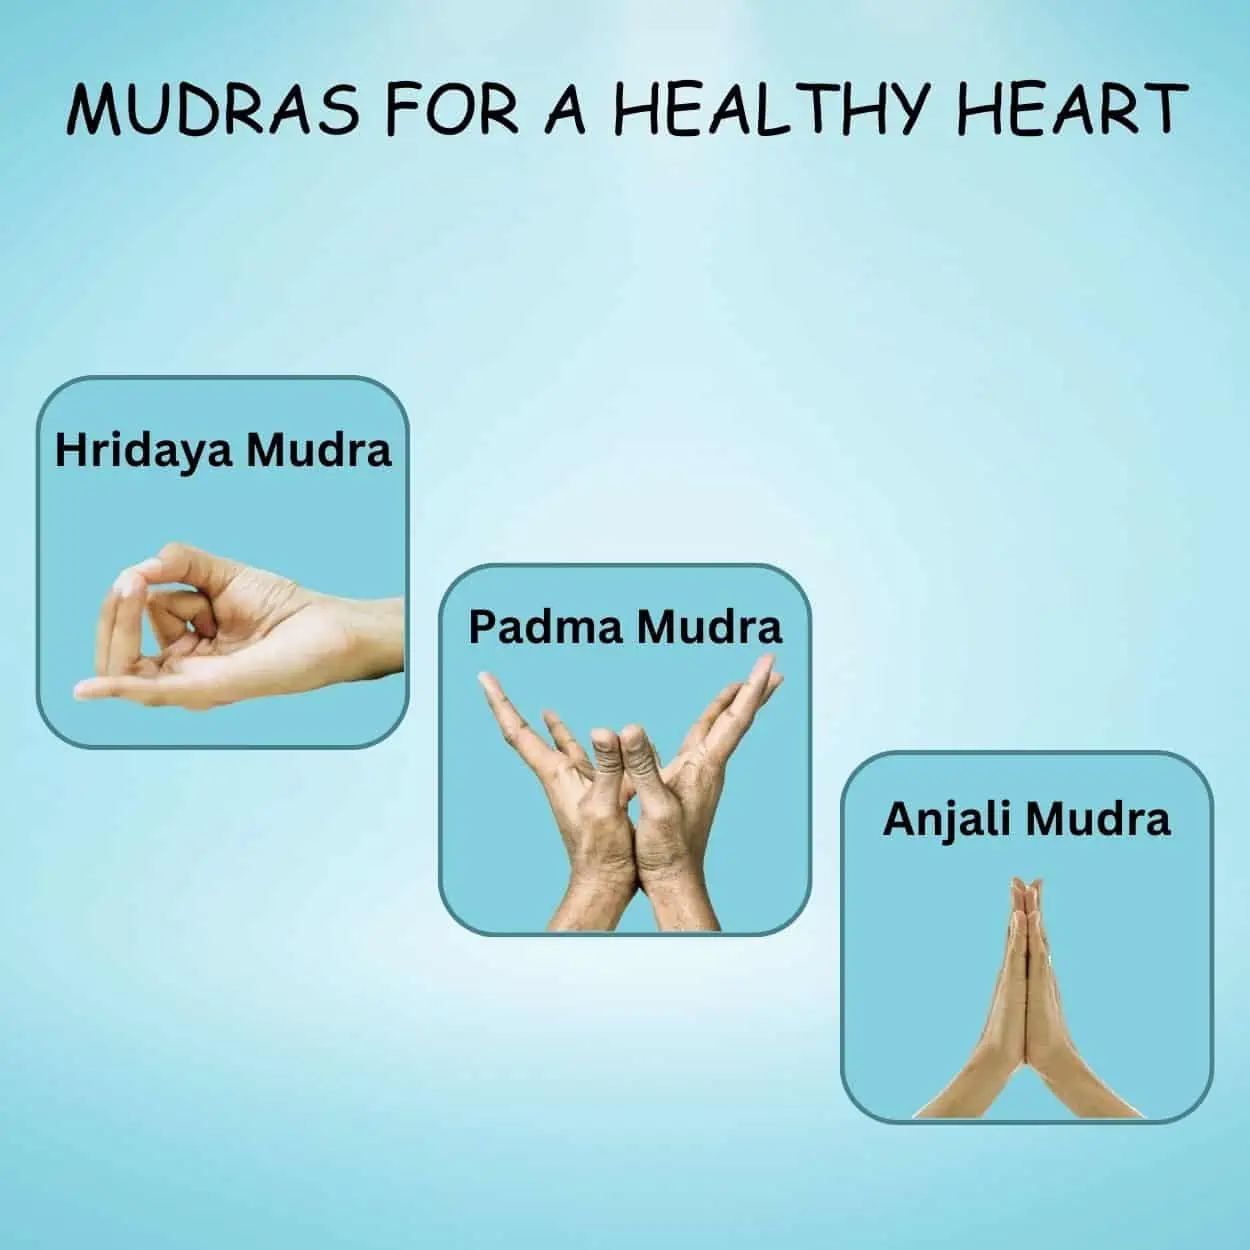 Mudras for a Healthy Heart